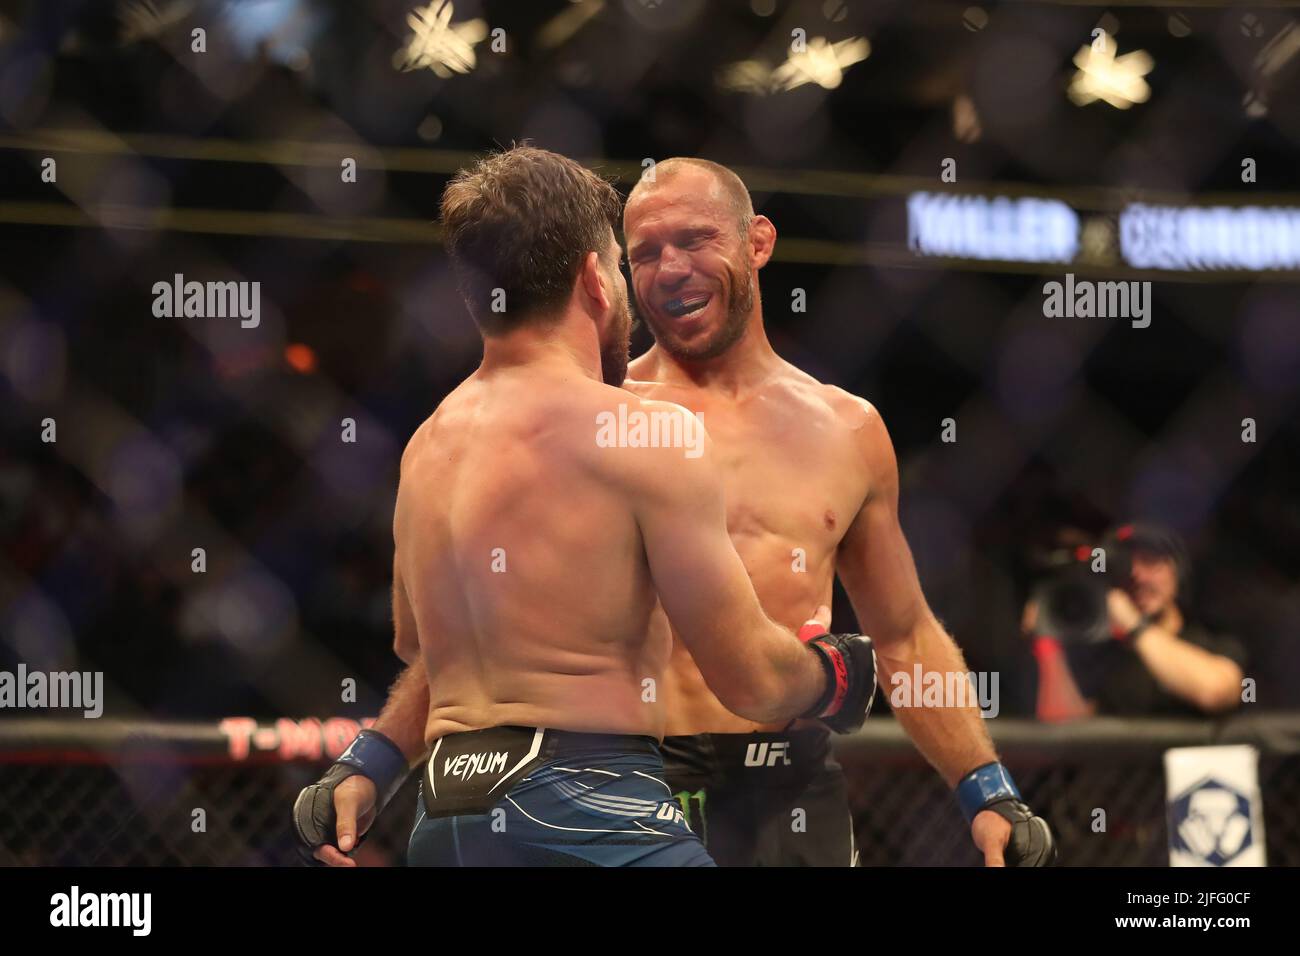 LAS VEGAS, NV - JULY 2: (L-R) Jim Miller and Donald Cerrone after their Welterweight bout during UFC 276 event at the T-Mobile Arena on July 2, 2022 in Las Vegas, Nevada, United States. (Photo by Alejandro Salazar/PxImages) Stock Photo